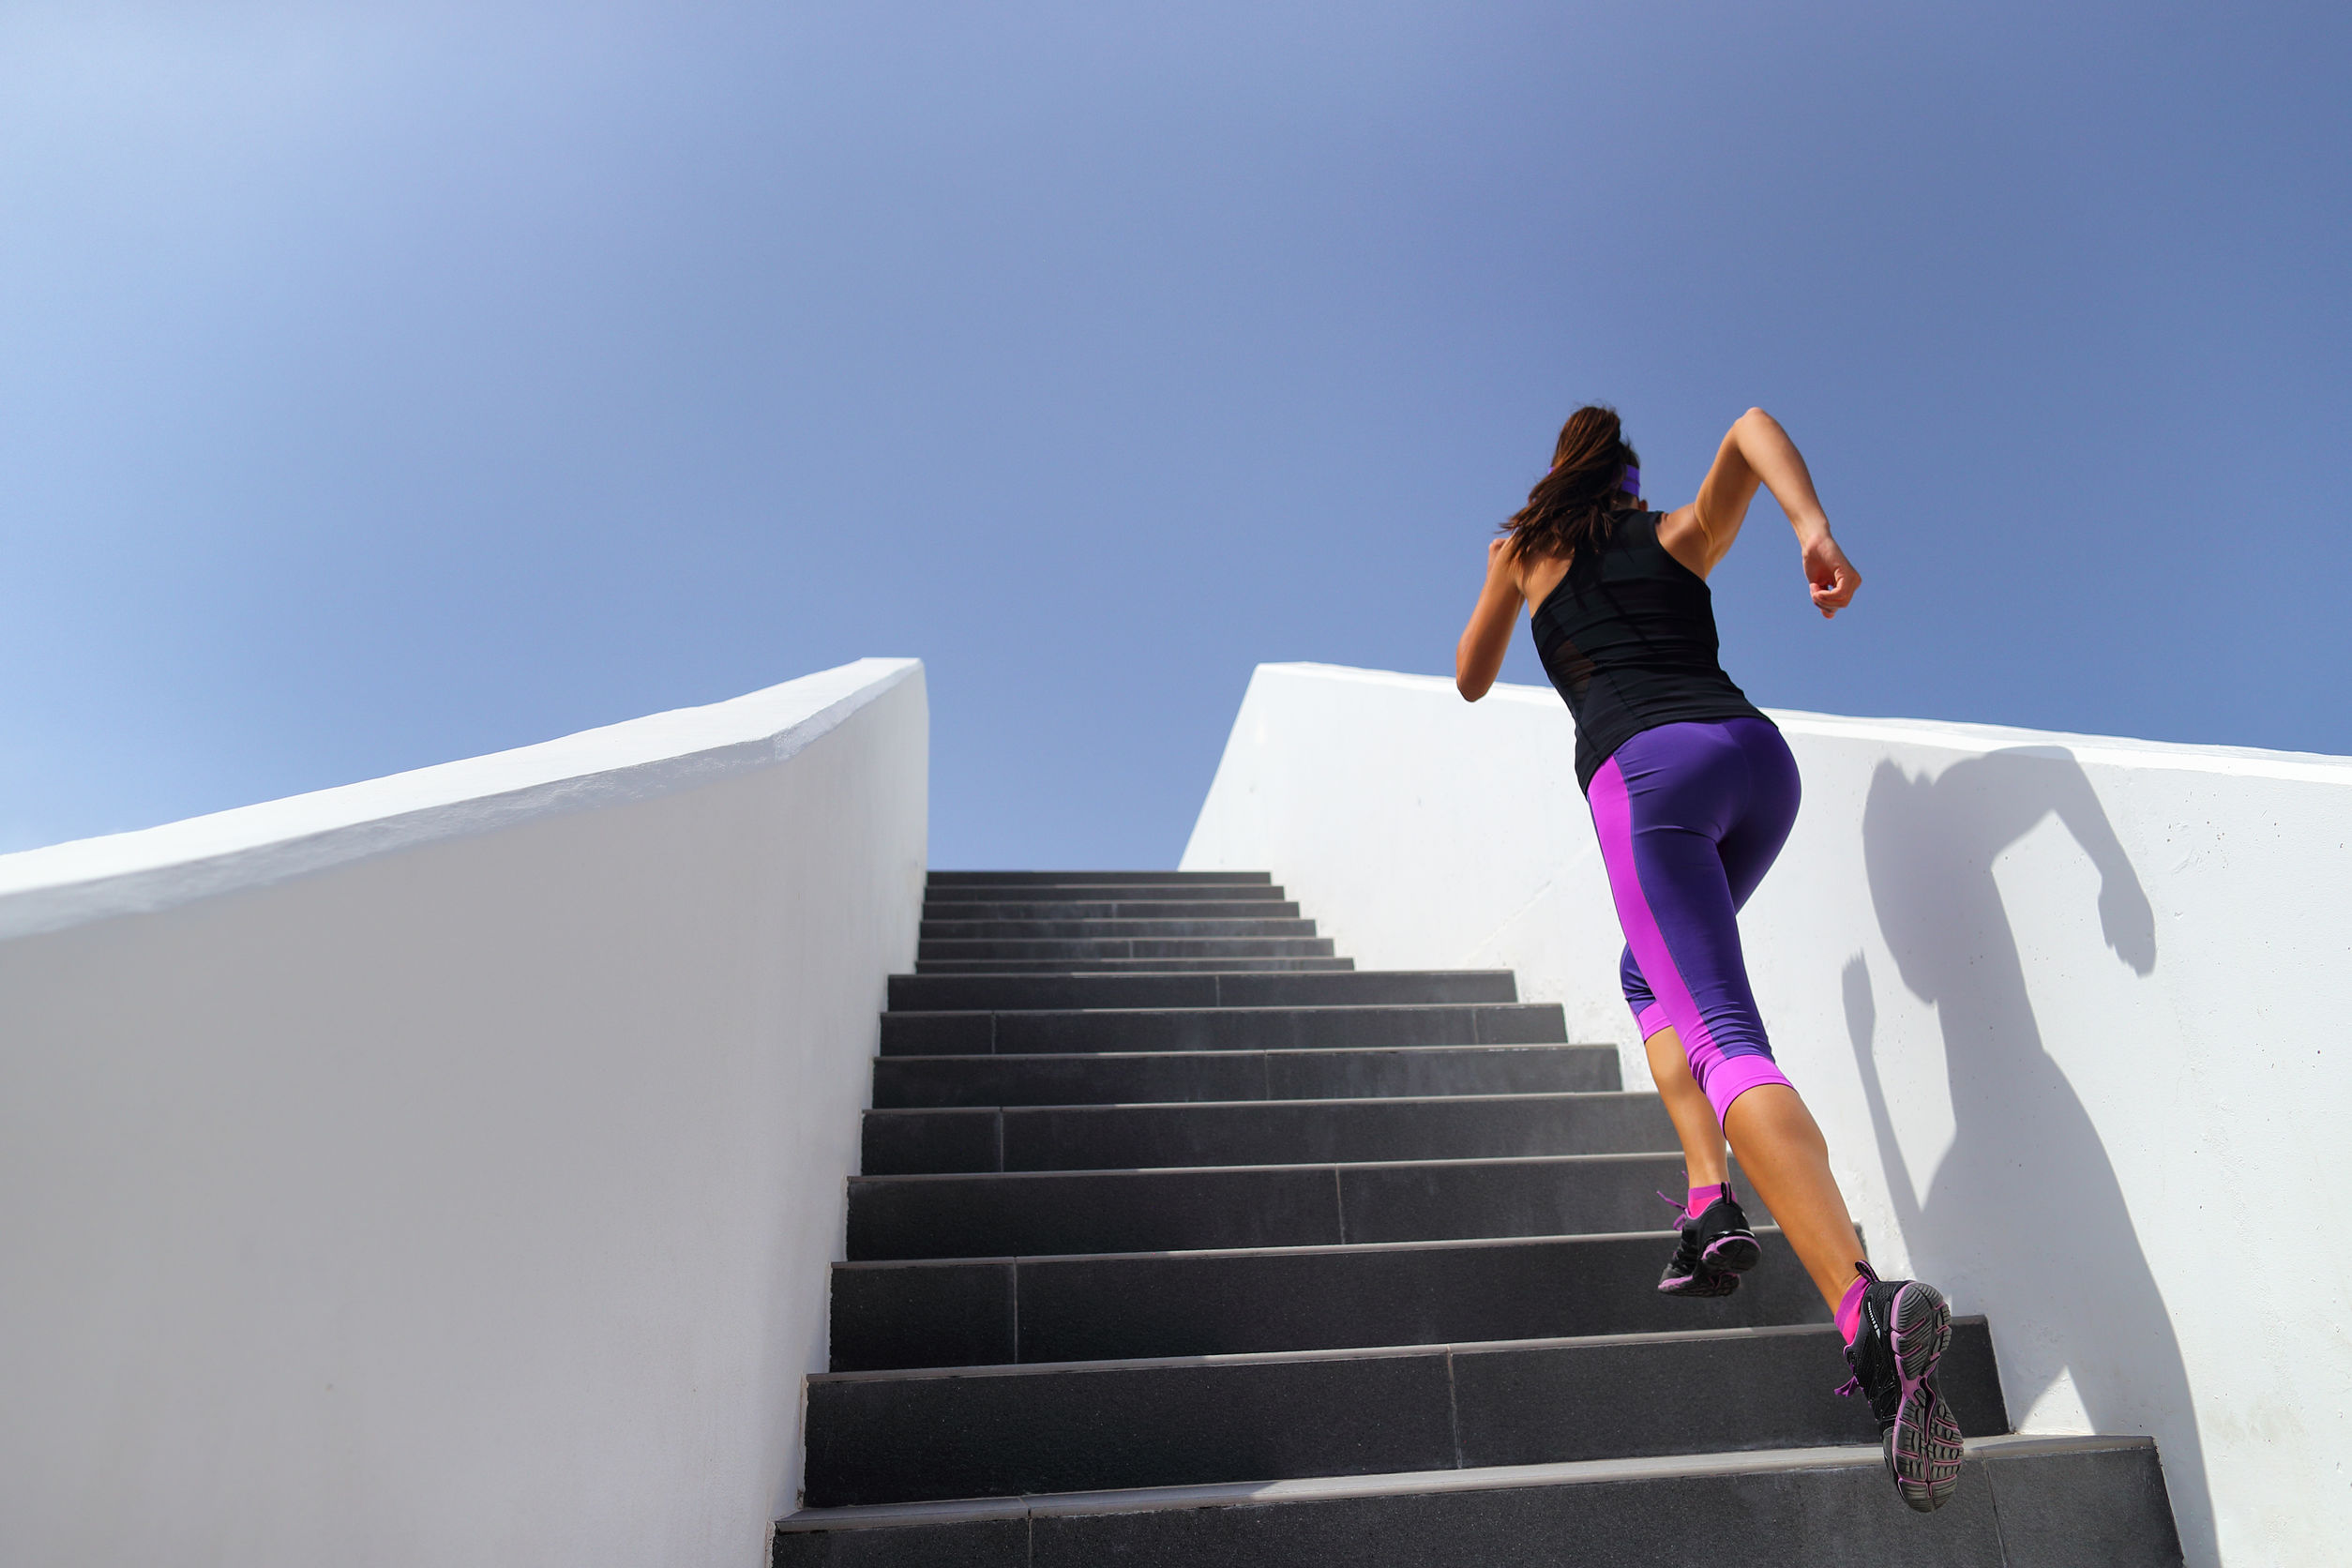 Stairs running workout woman training cardio at gym. Fitness girl exercising legs muscles outdoors with explosive exercises.